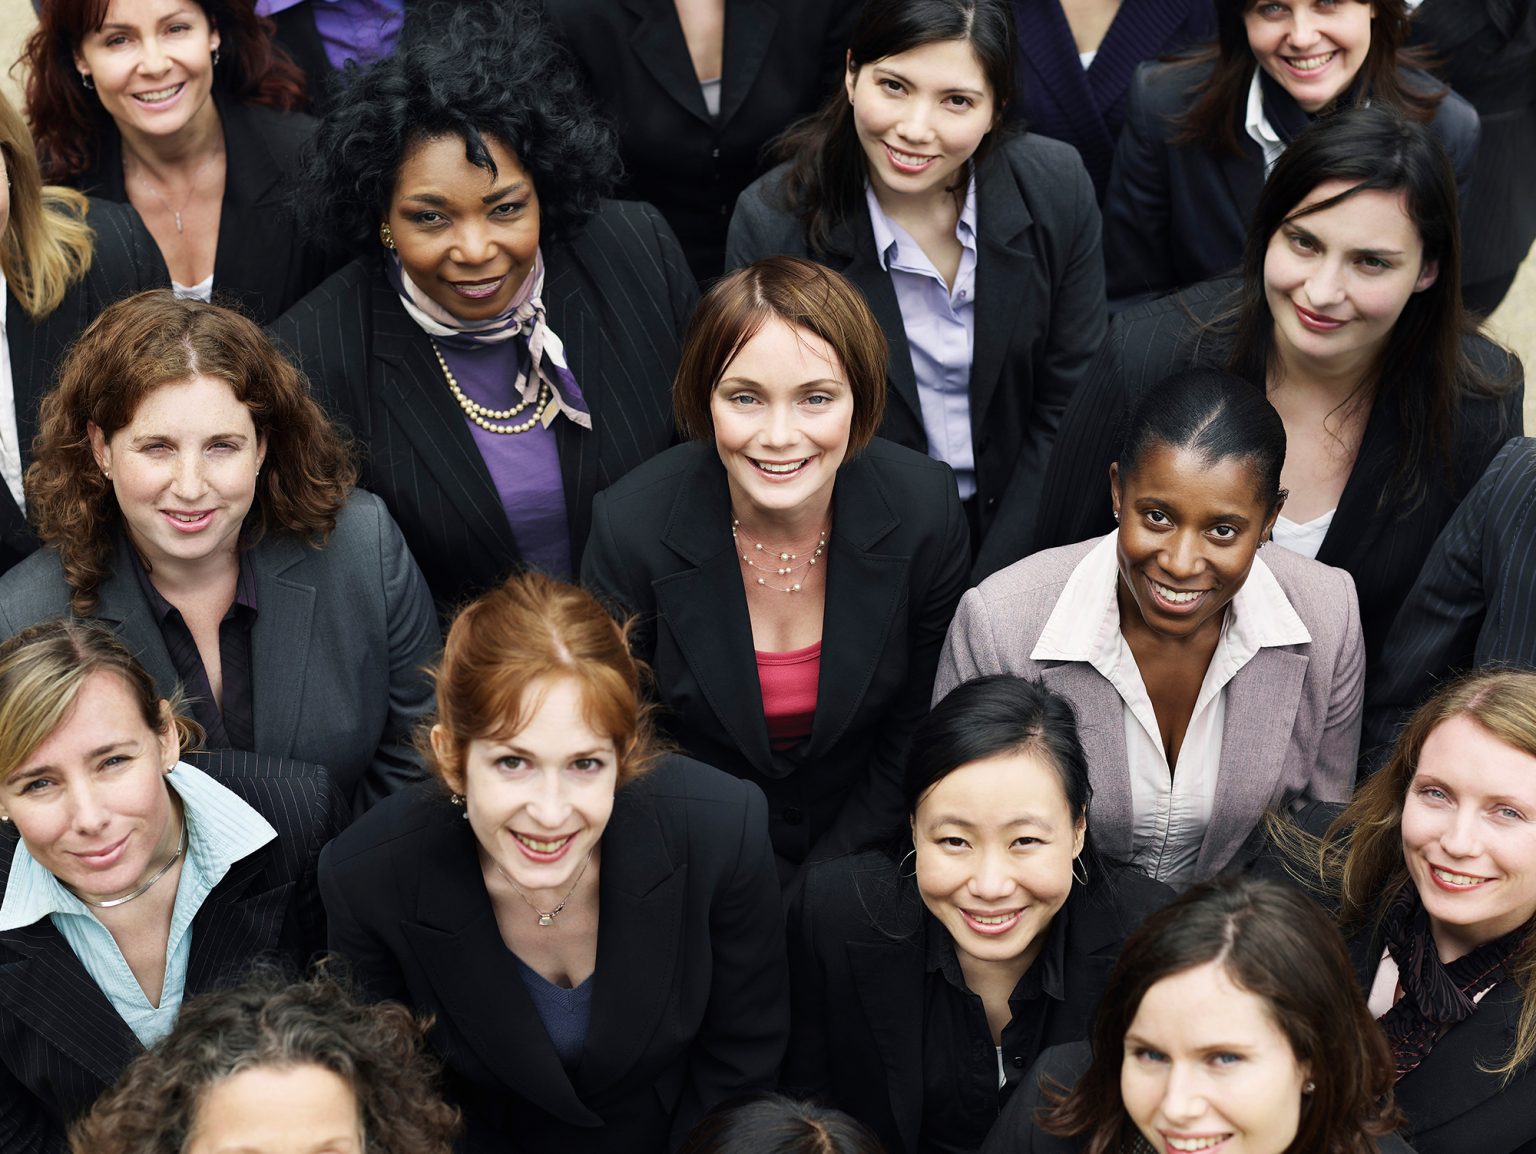 Elevated view of a group of smiling multiethnic businesswomen